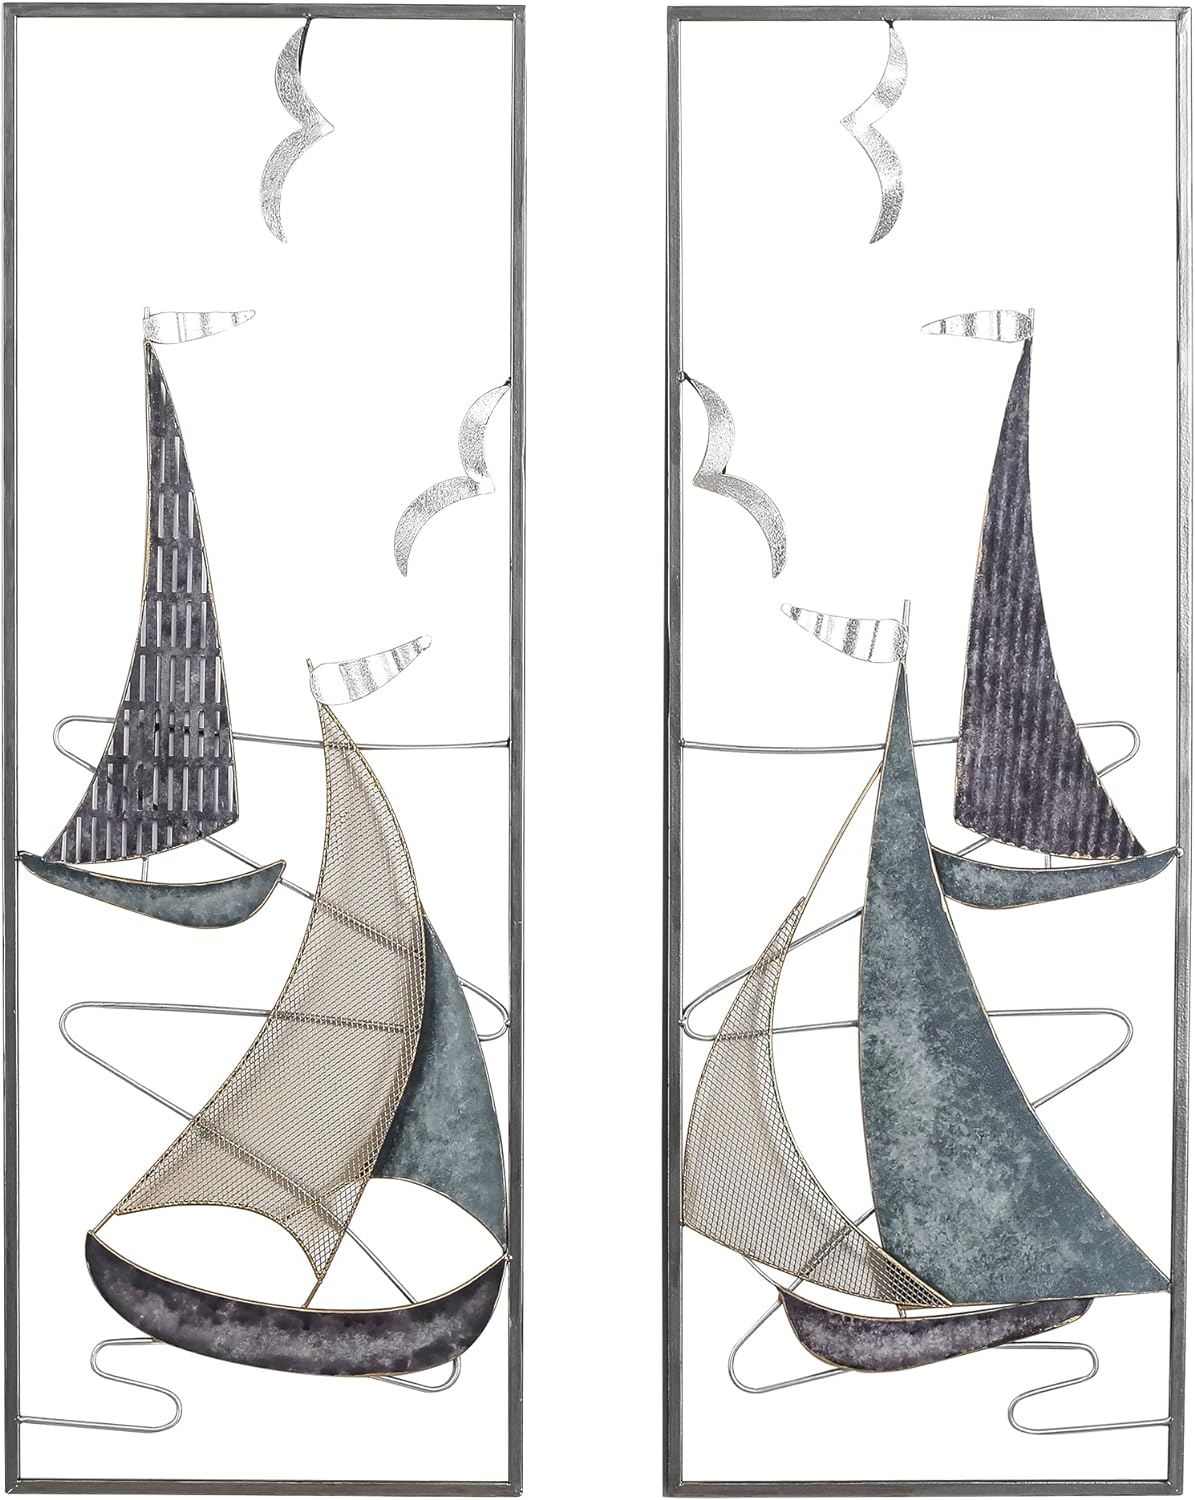 Adeco 3D Metal Sailboat Wall Art Set of 2, Handmade Antique Finishing Metal Wall Sculptures Nautical Decor Ornaments for Home Hotel Living Room Bedroom Dining Room